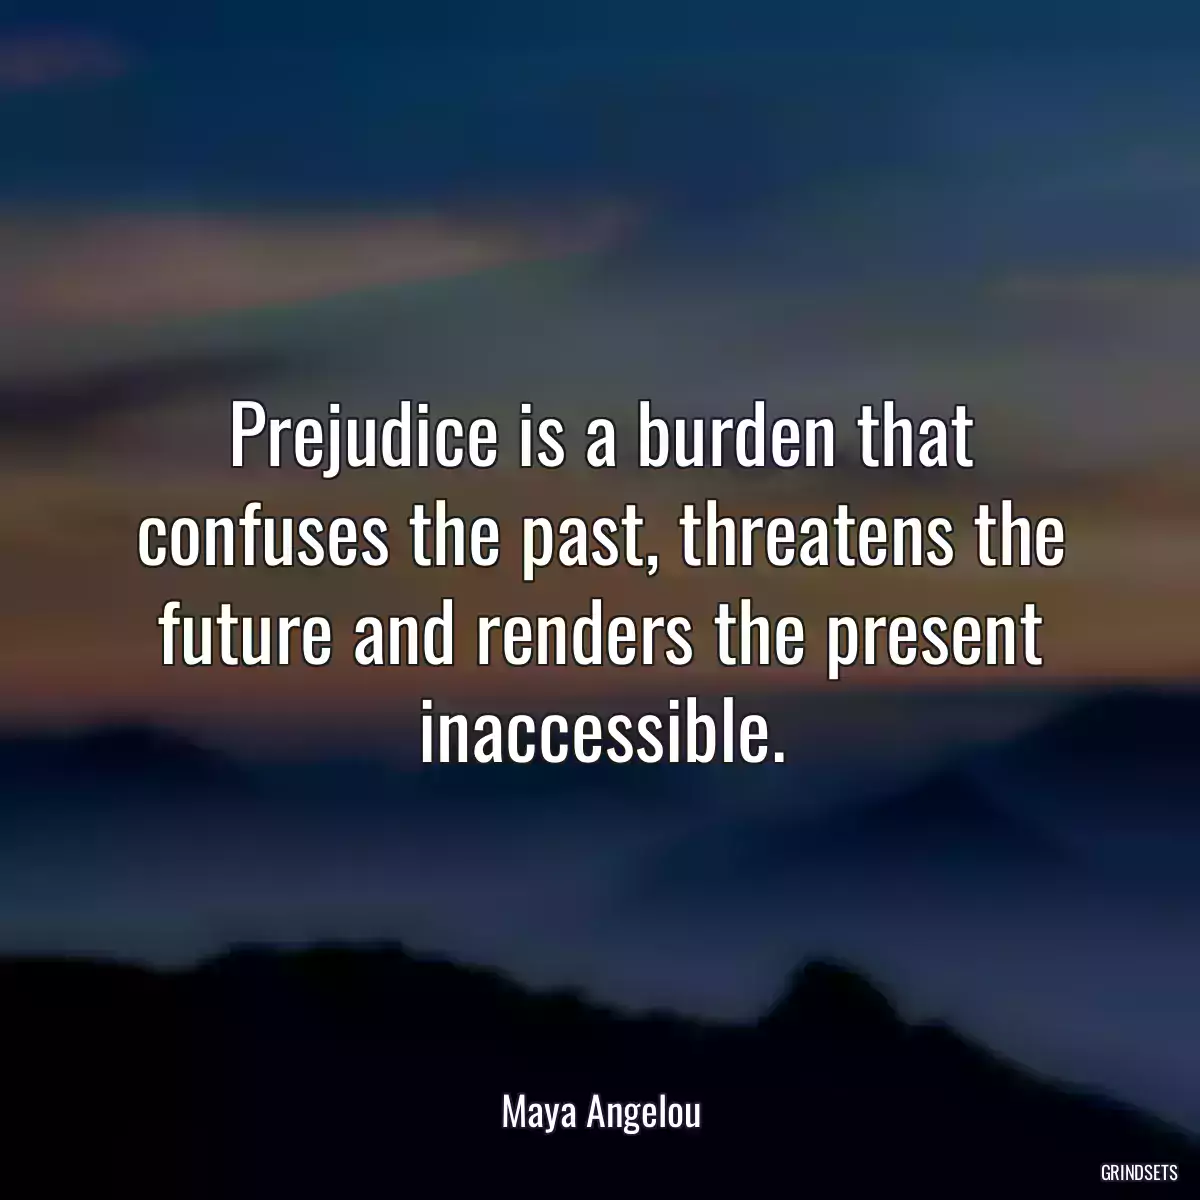 Prejudice is a burden that confuses the past, threatens the future and renders the present inaccessible.